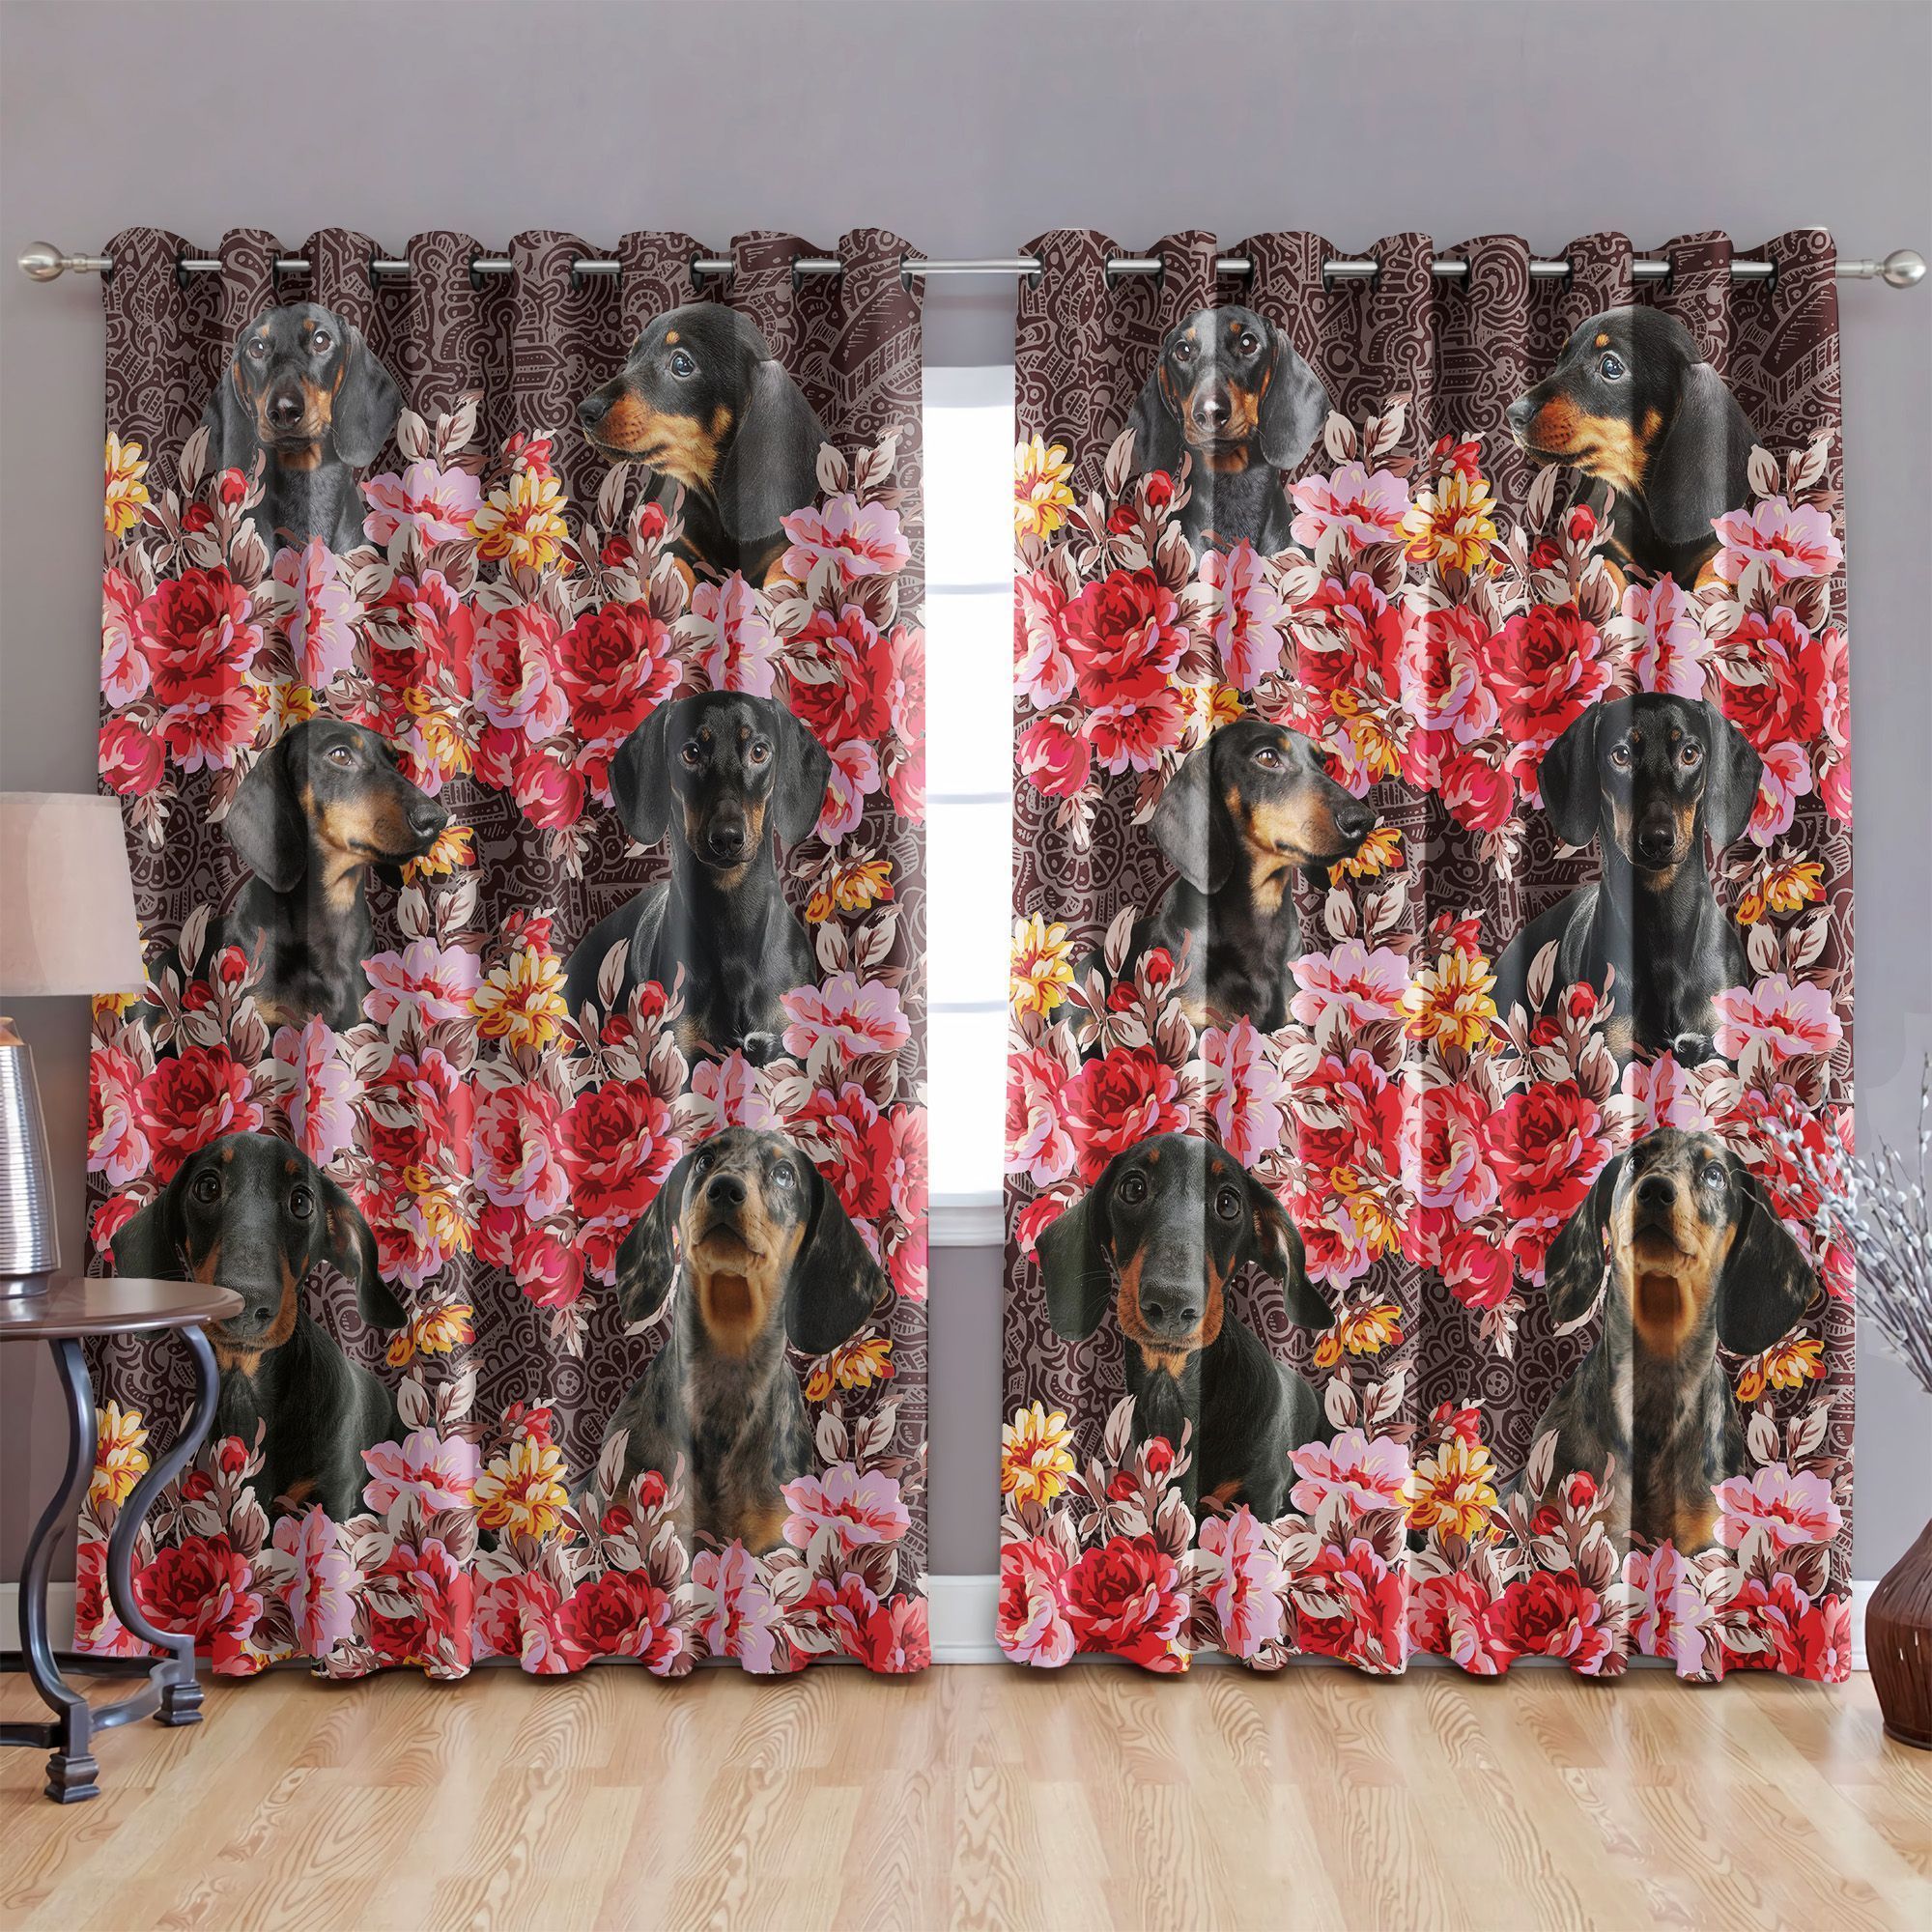 Dachshund With Pink And Red Flower Printed Window Curtain Home Decor